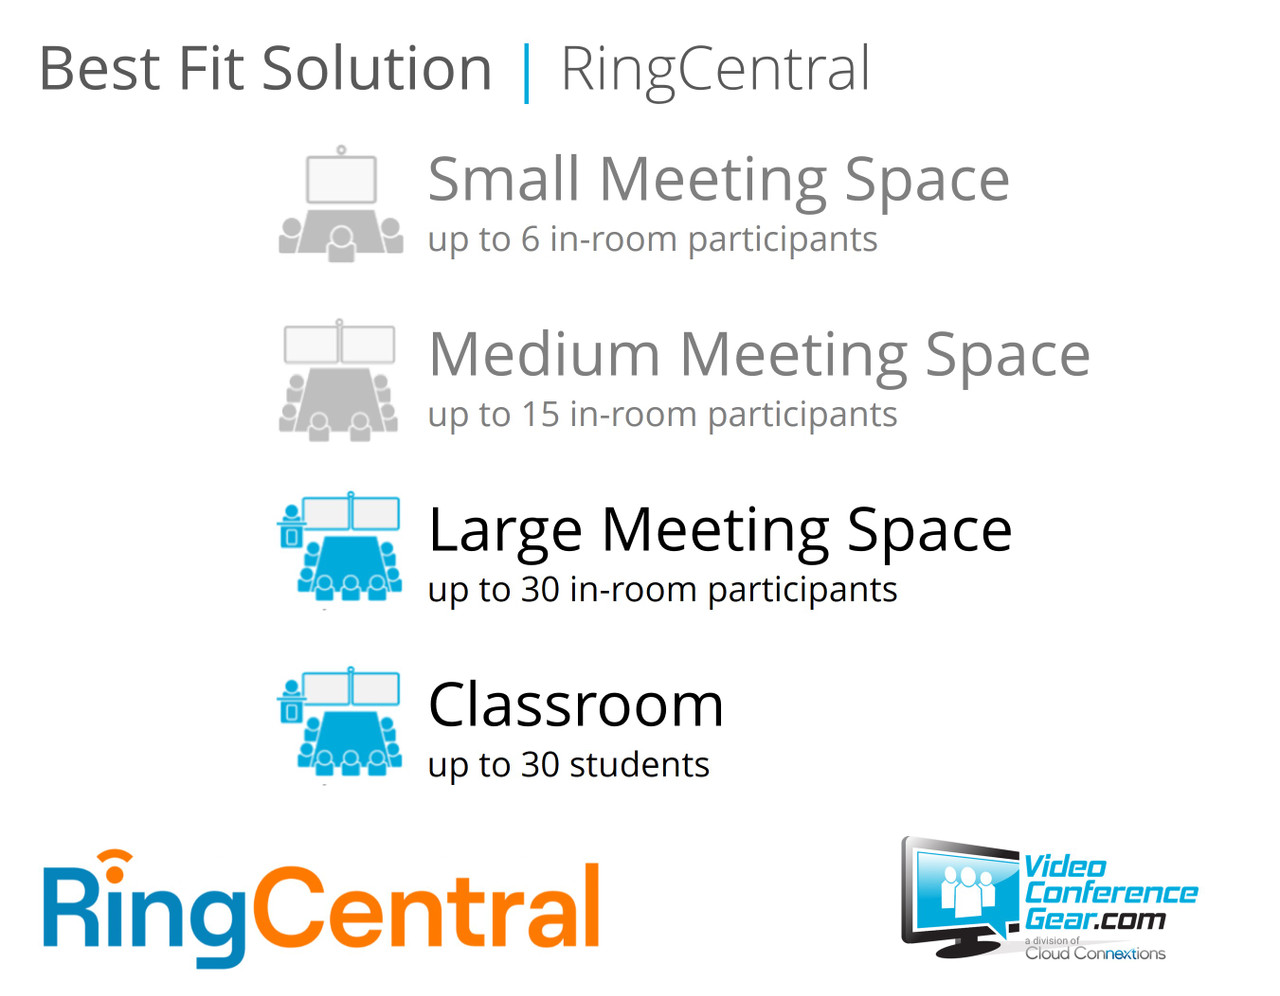 RingCentral Rooms Solution with AVer CAM550 and Nureva HDL410 (White) Large Room